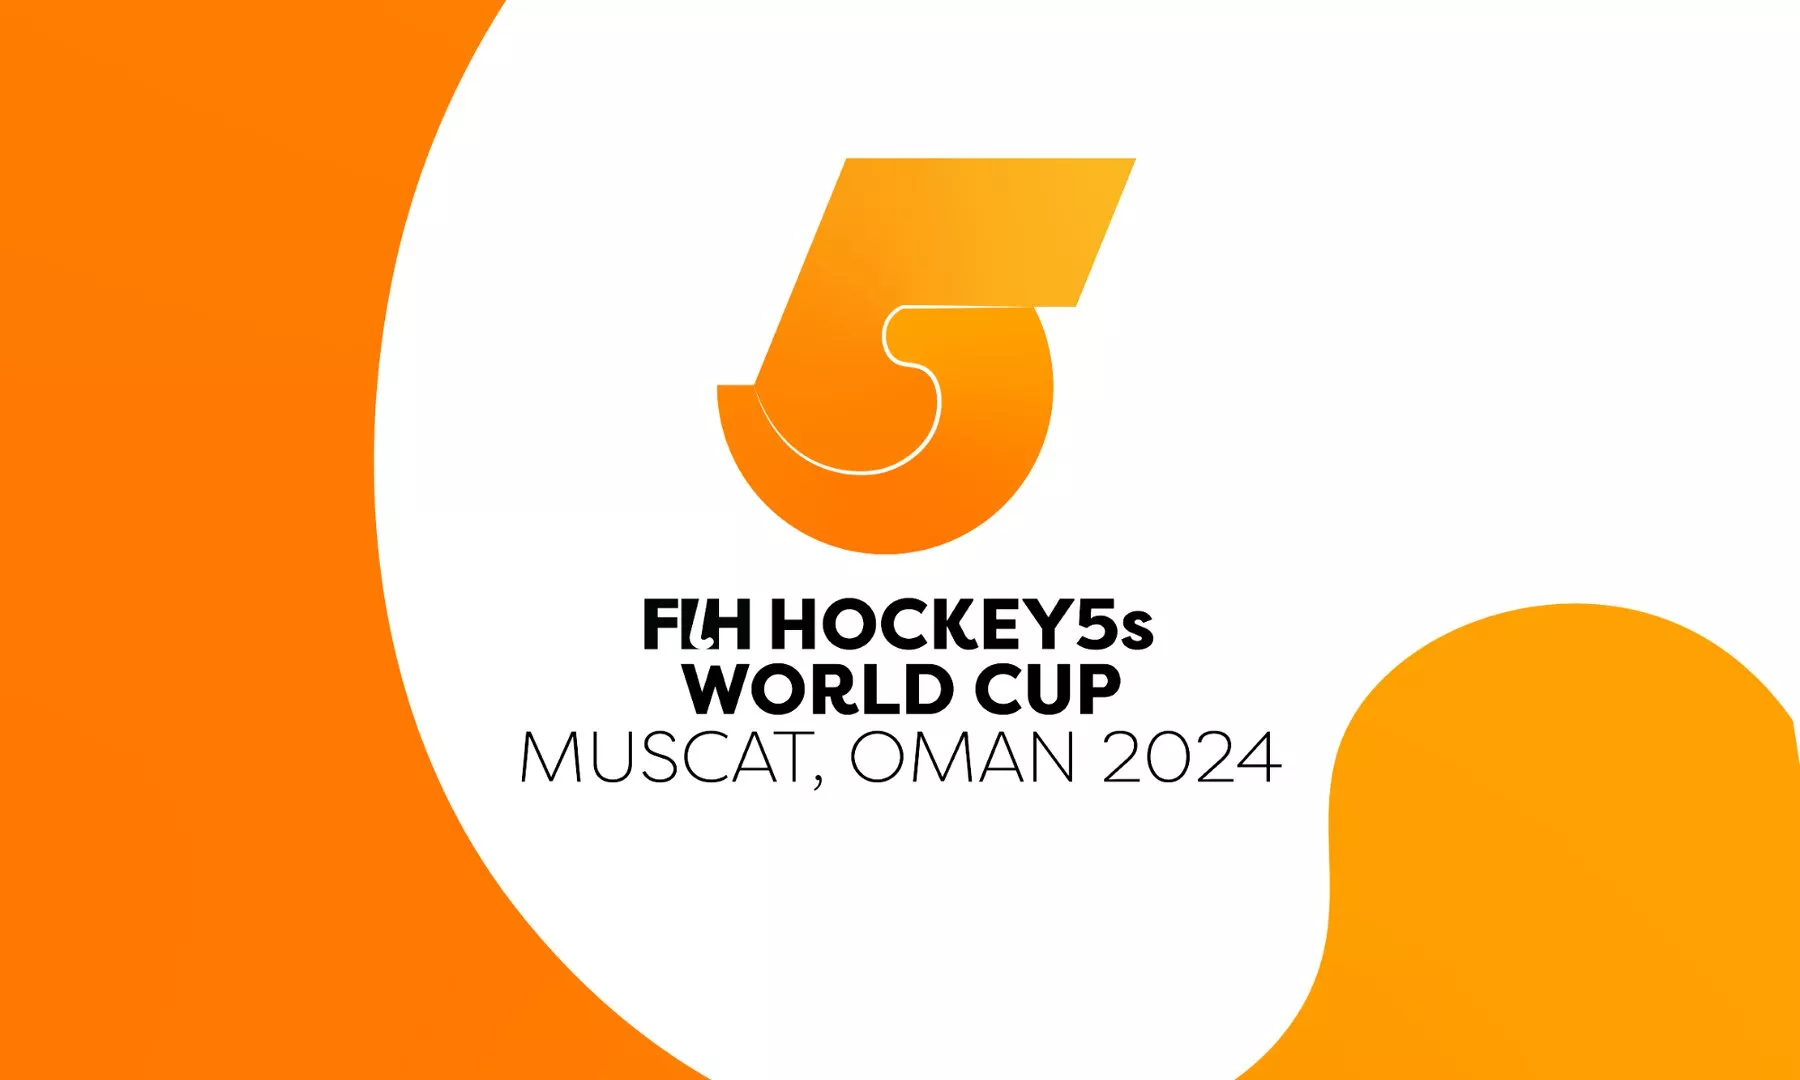 FIH announce schedule, pools for Hockey 5s World Cup 2024 in Oman